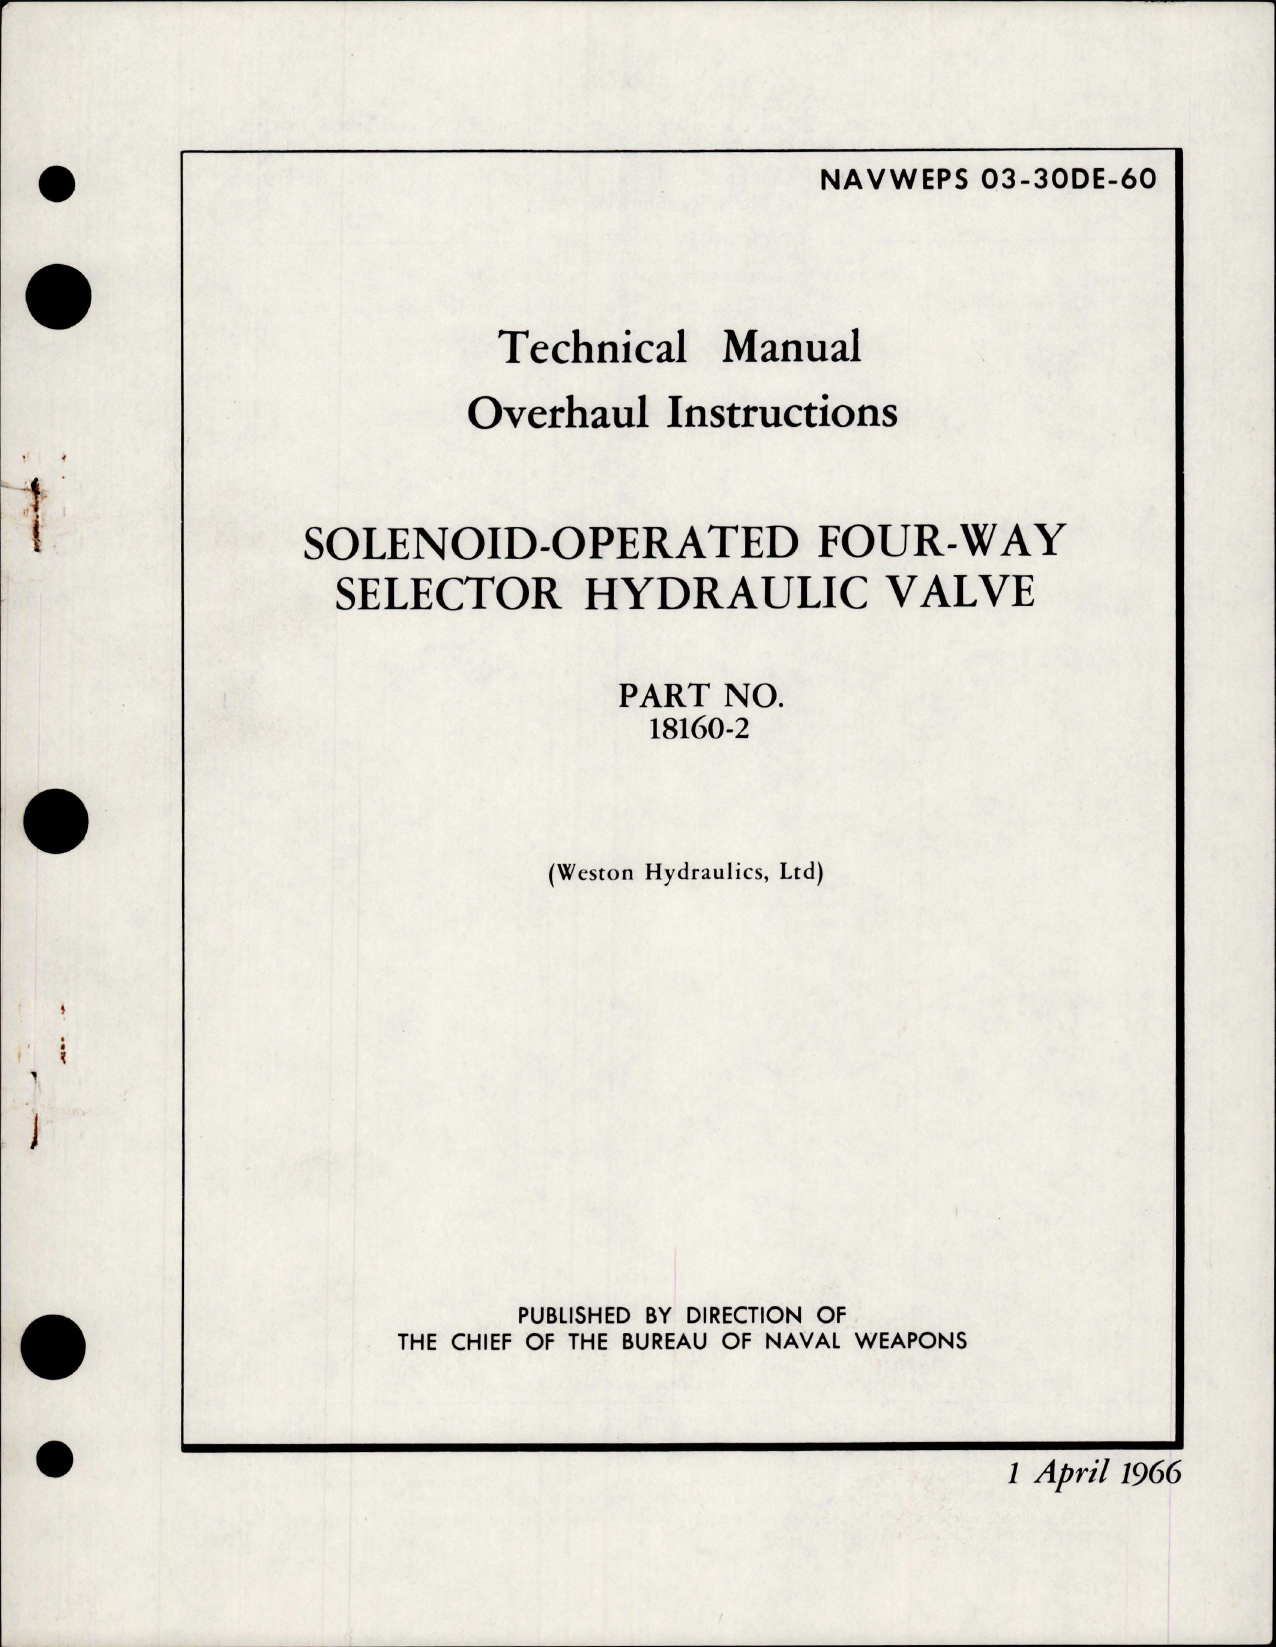 Sample page 1 from AirCorps Library document: Overhaul Instructions for Solenoid Operated Four Way Selector Hydraulic Valve - Part 18160-2 